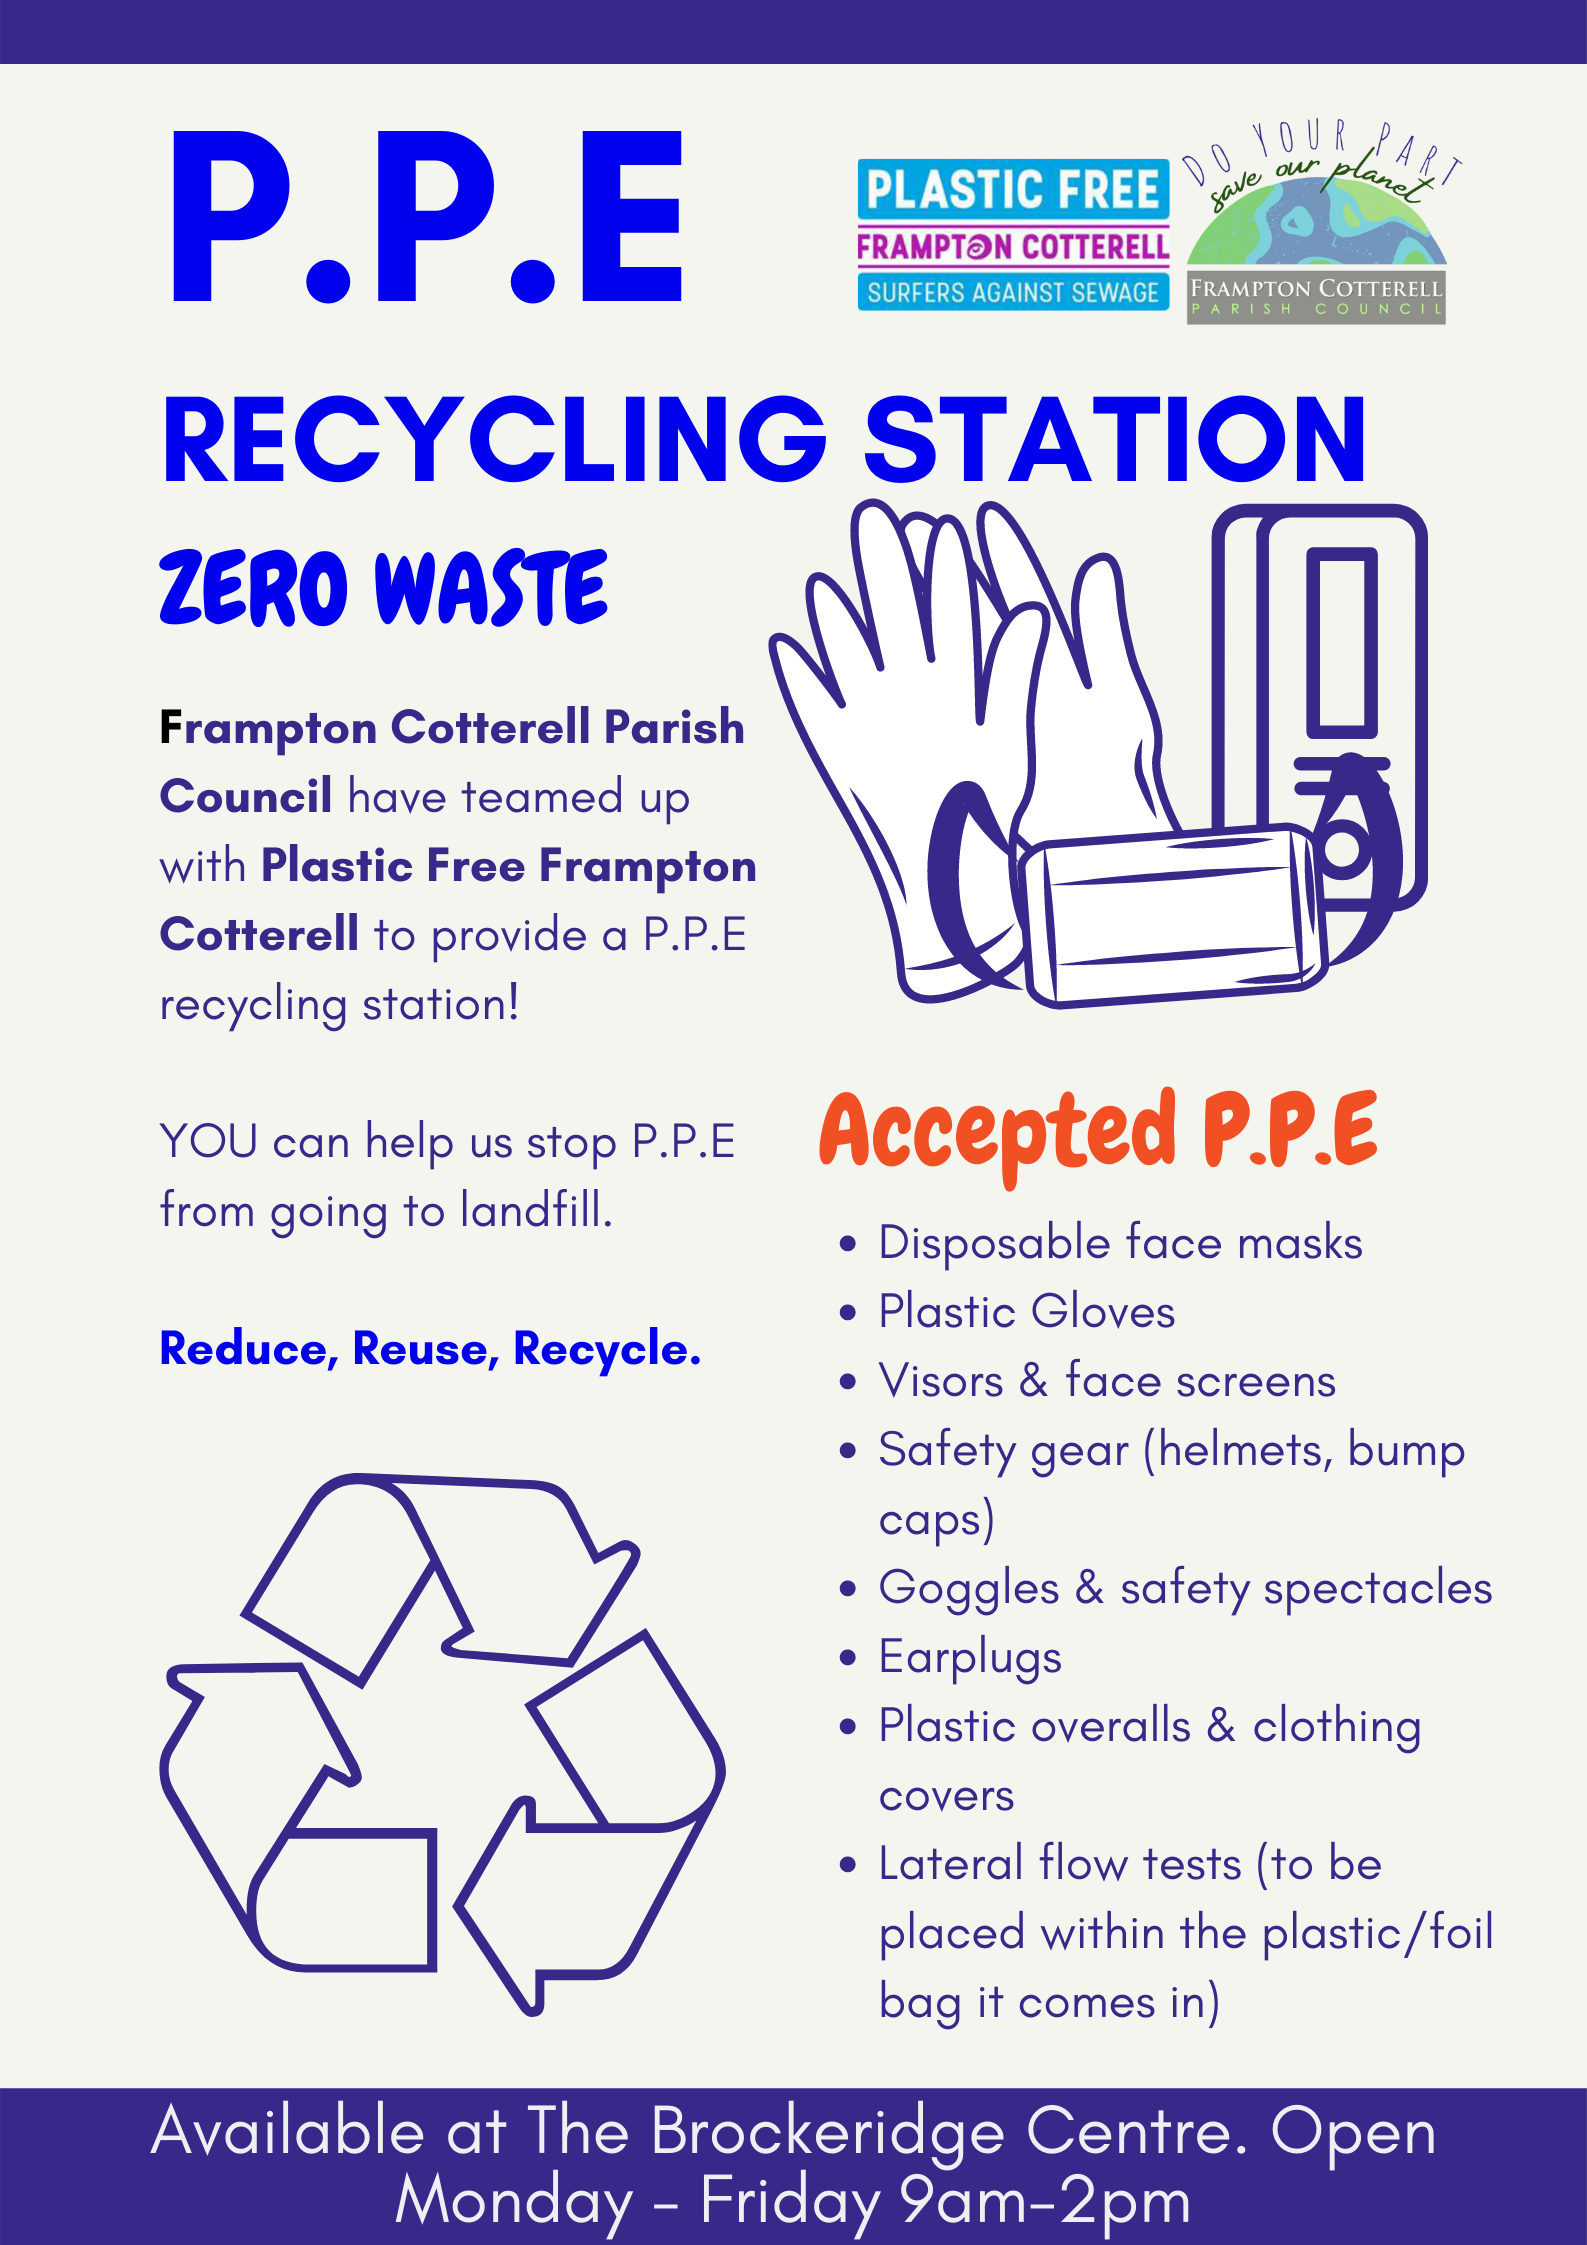 PPE RECYCLING STATION with picture of gloves, mask and lateral flow test